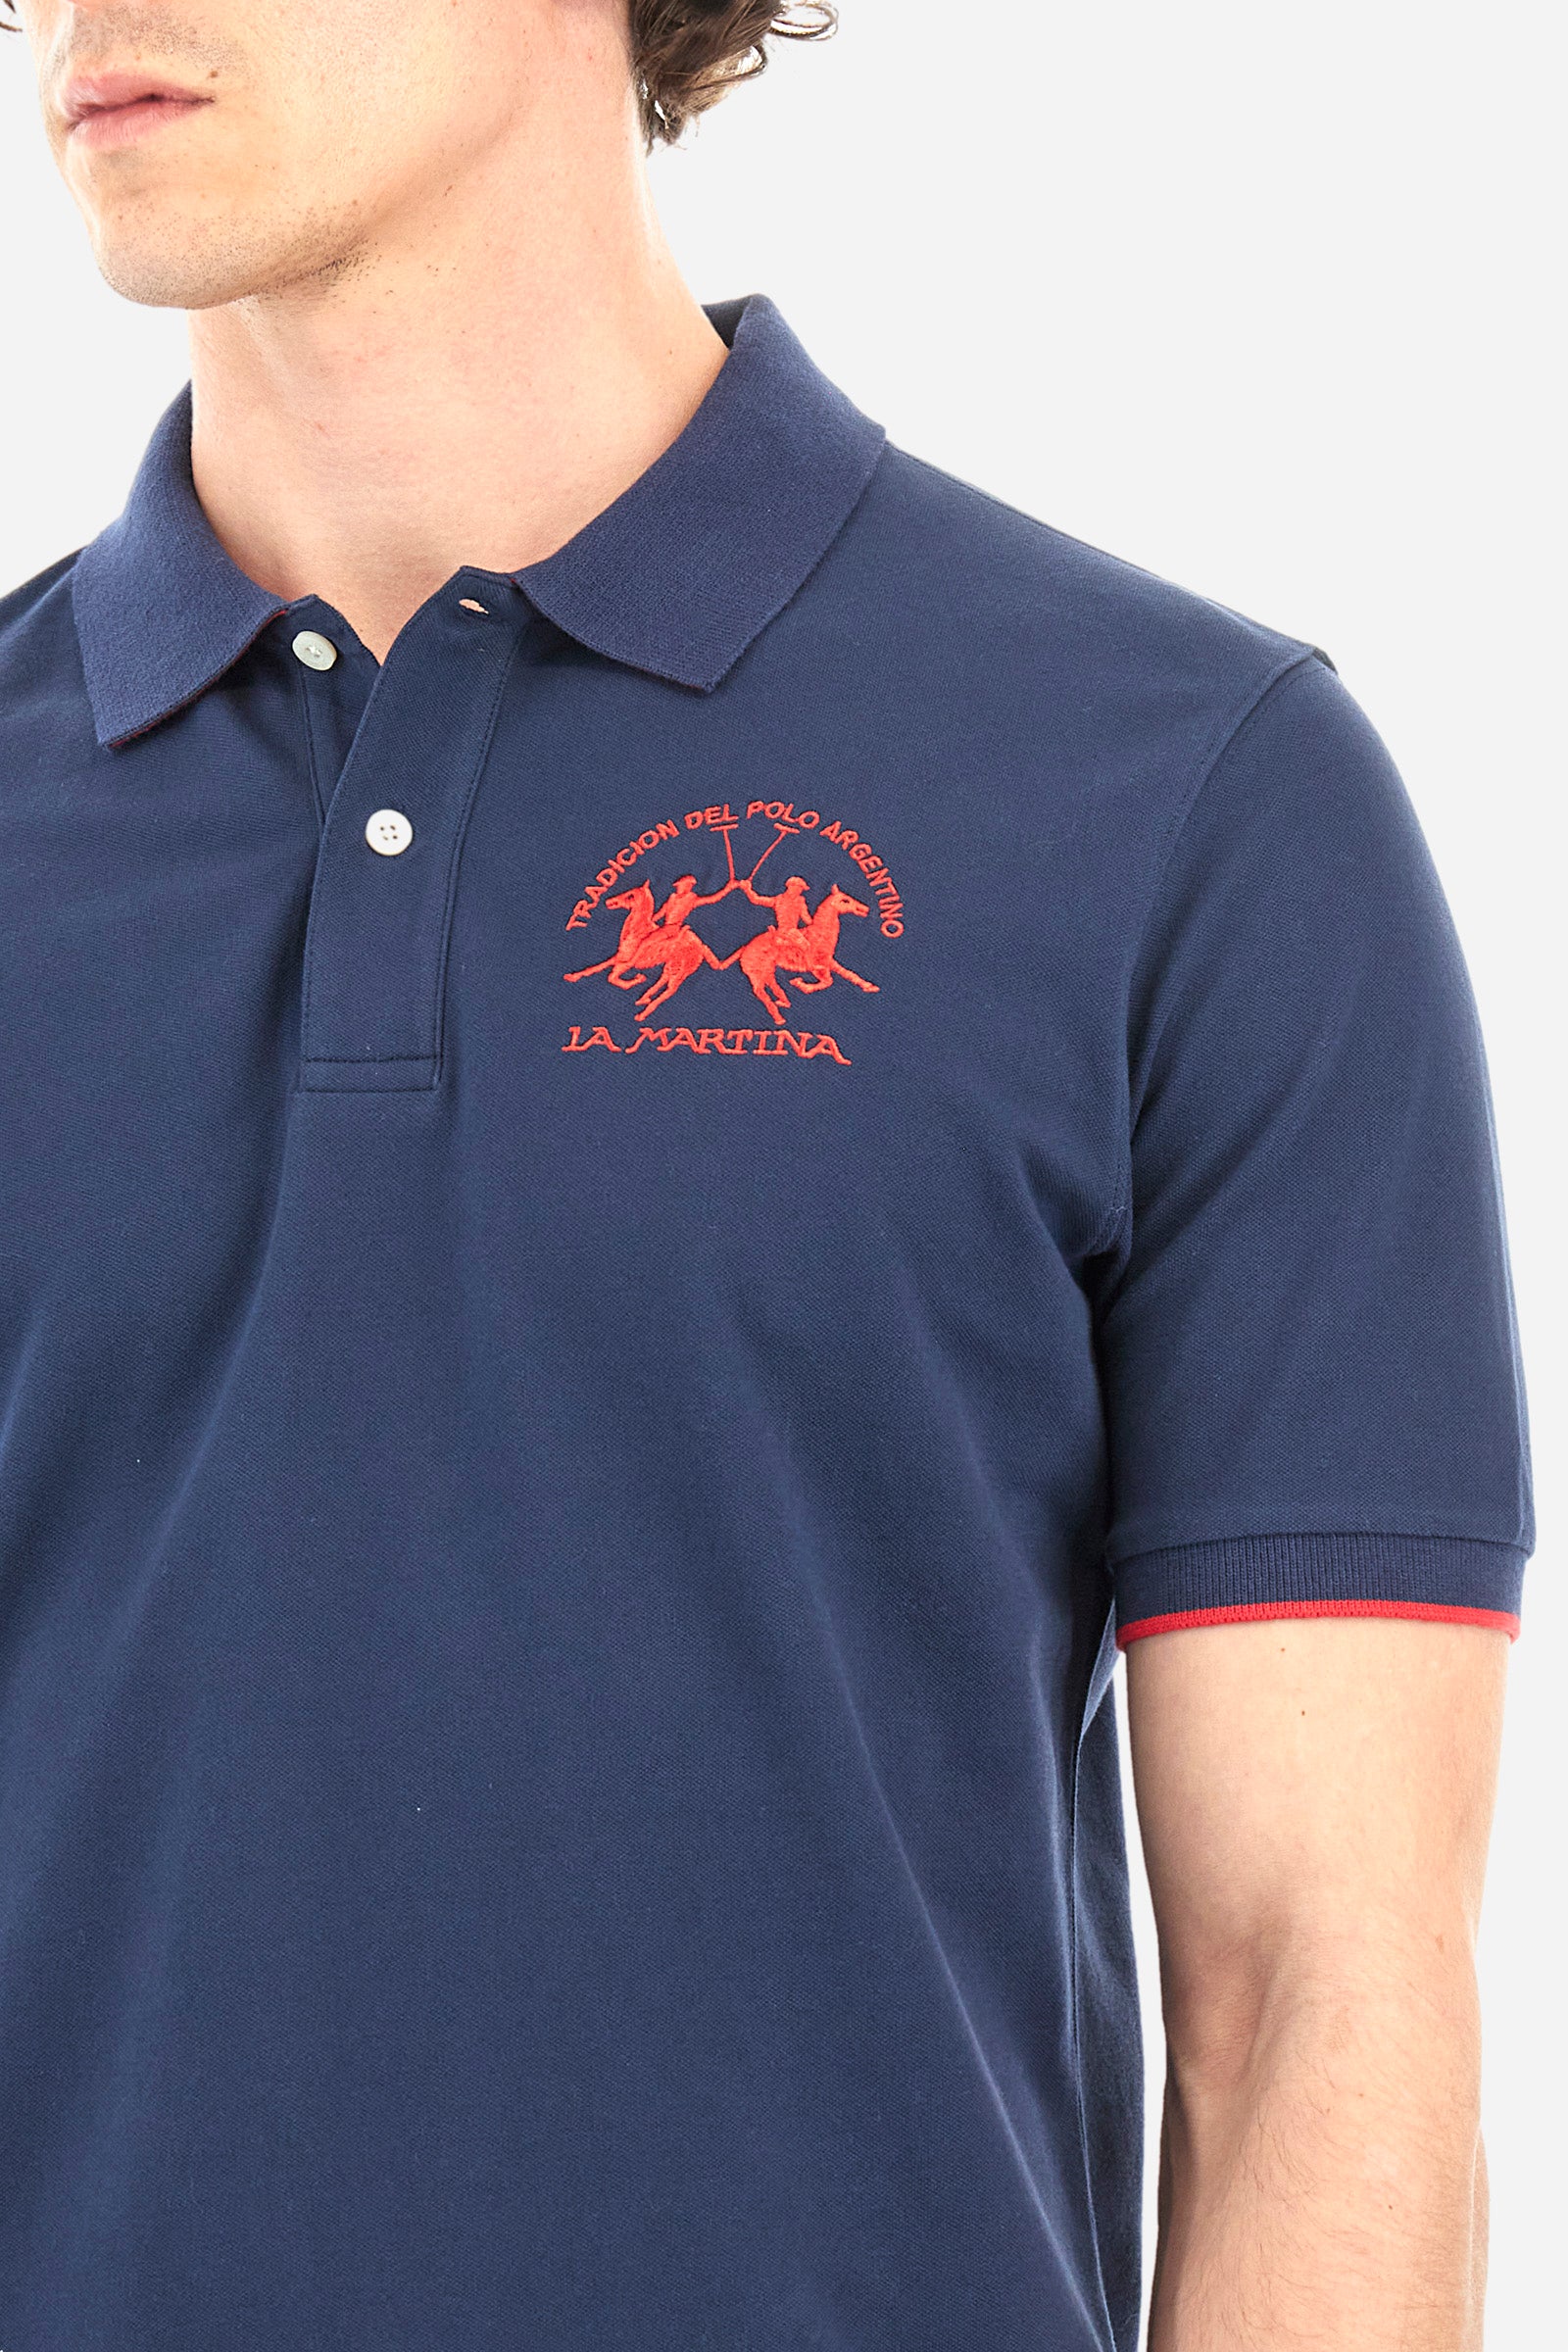 Men's polo shirt in a regular fit - Miguel